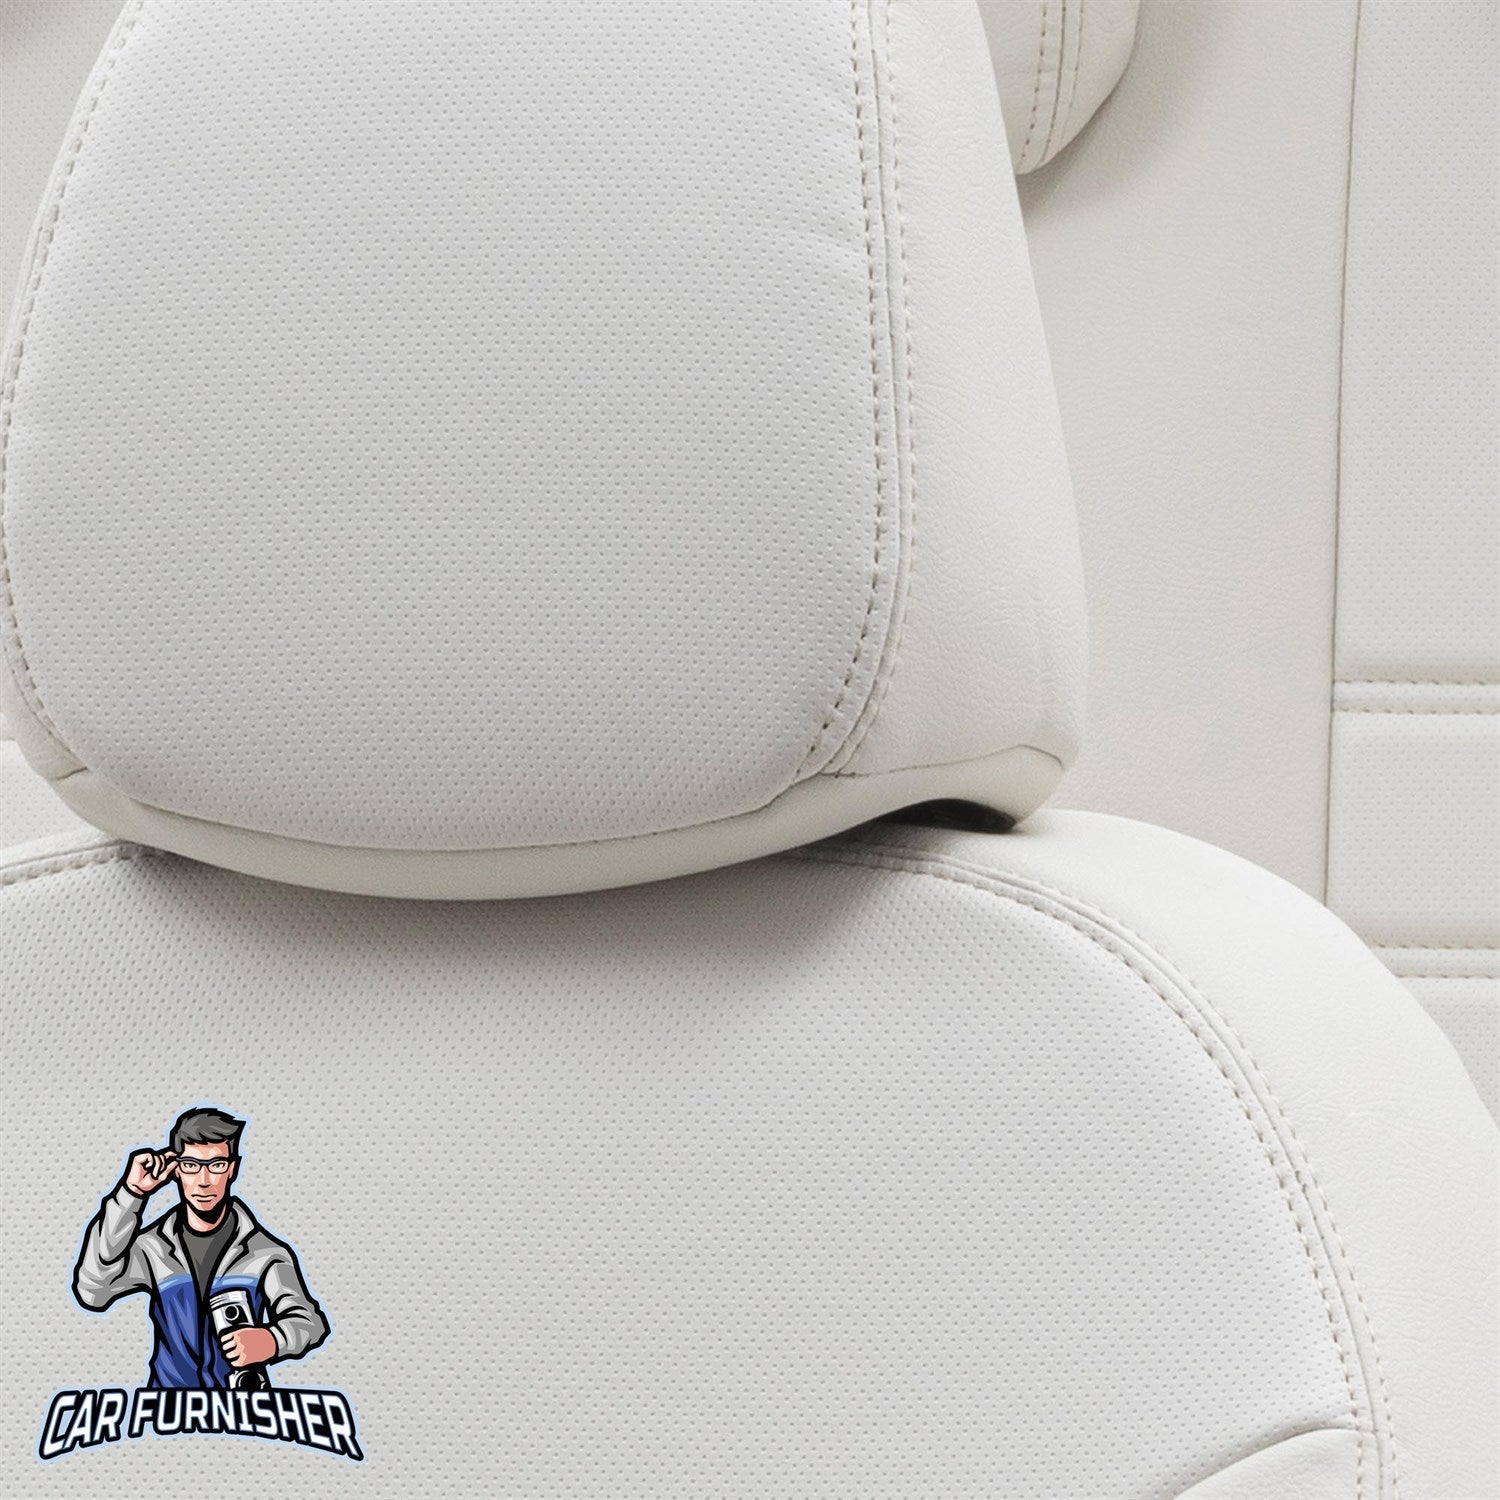 Volvo S40 Seat Cover Istanbul Leather Design Ivory Leather